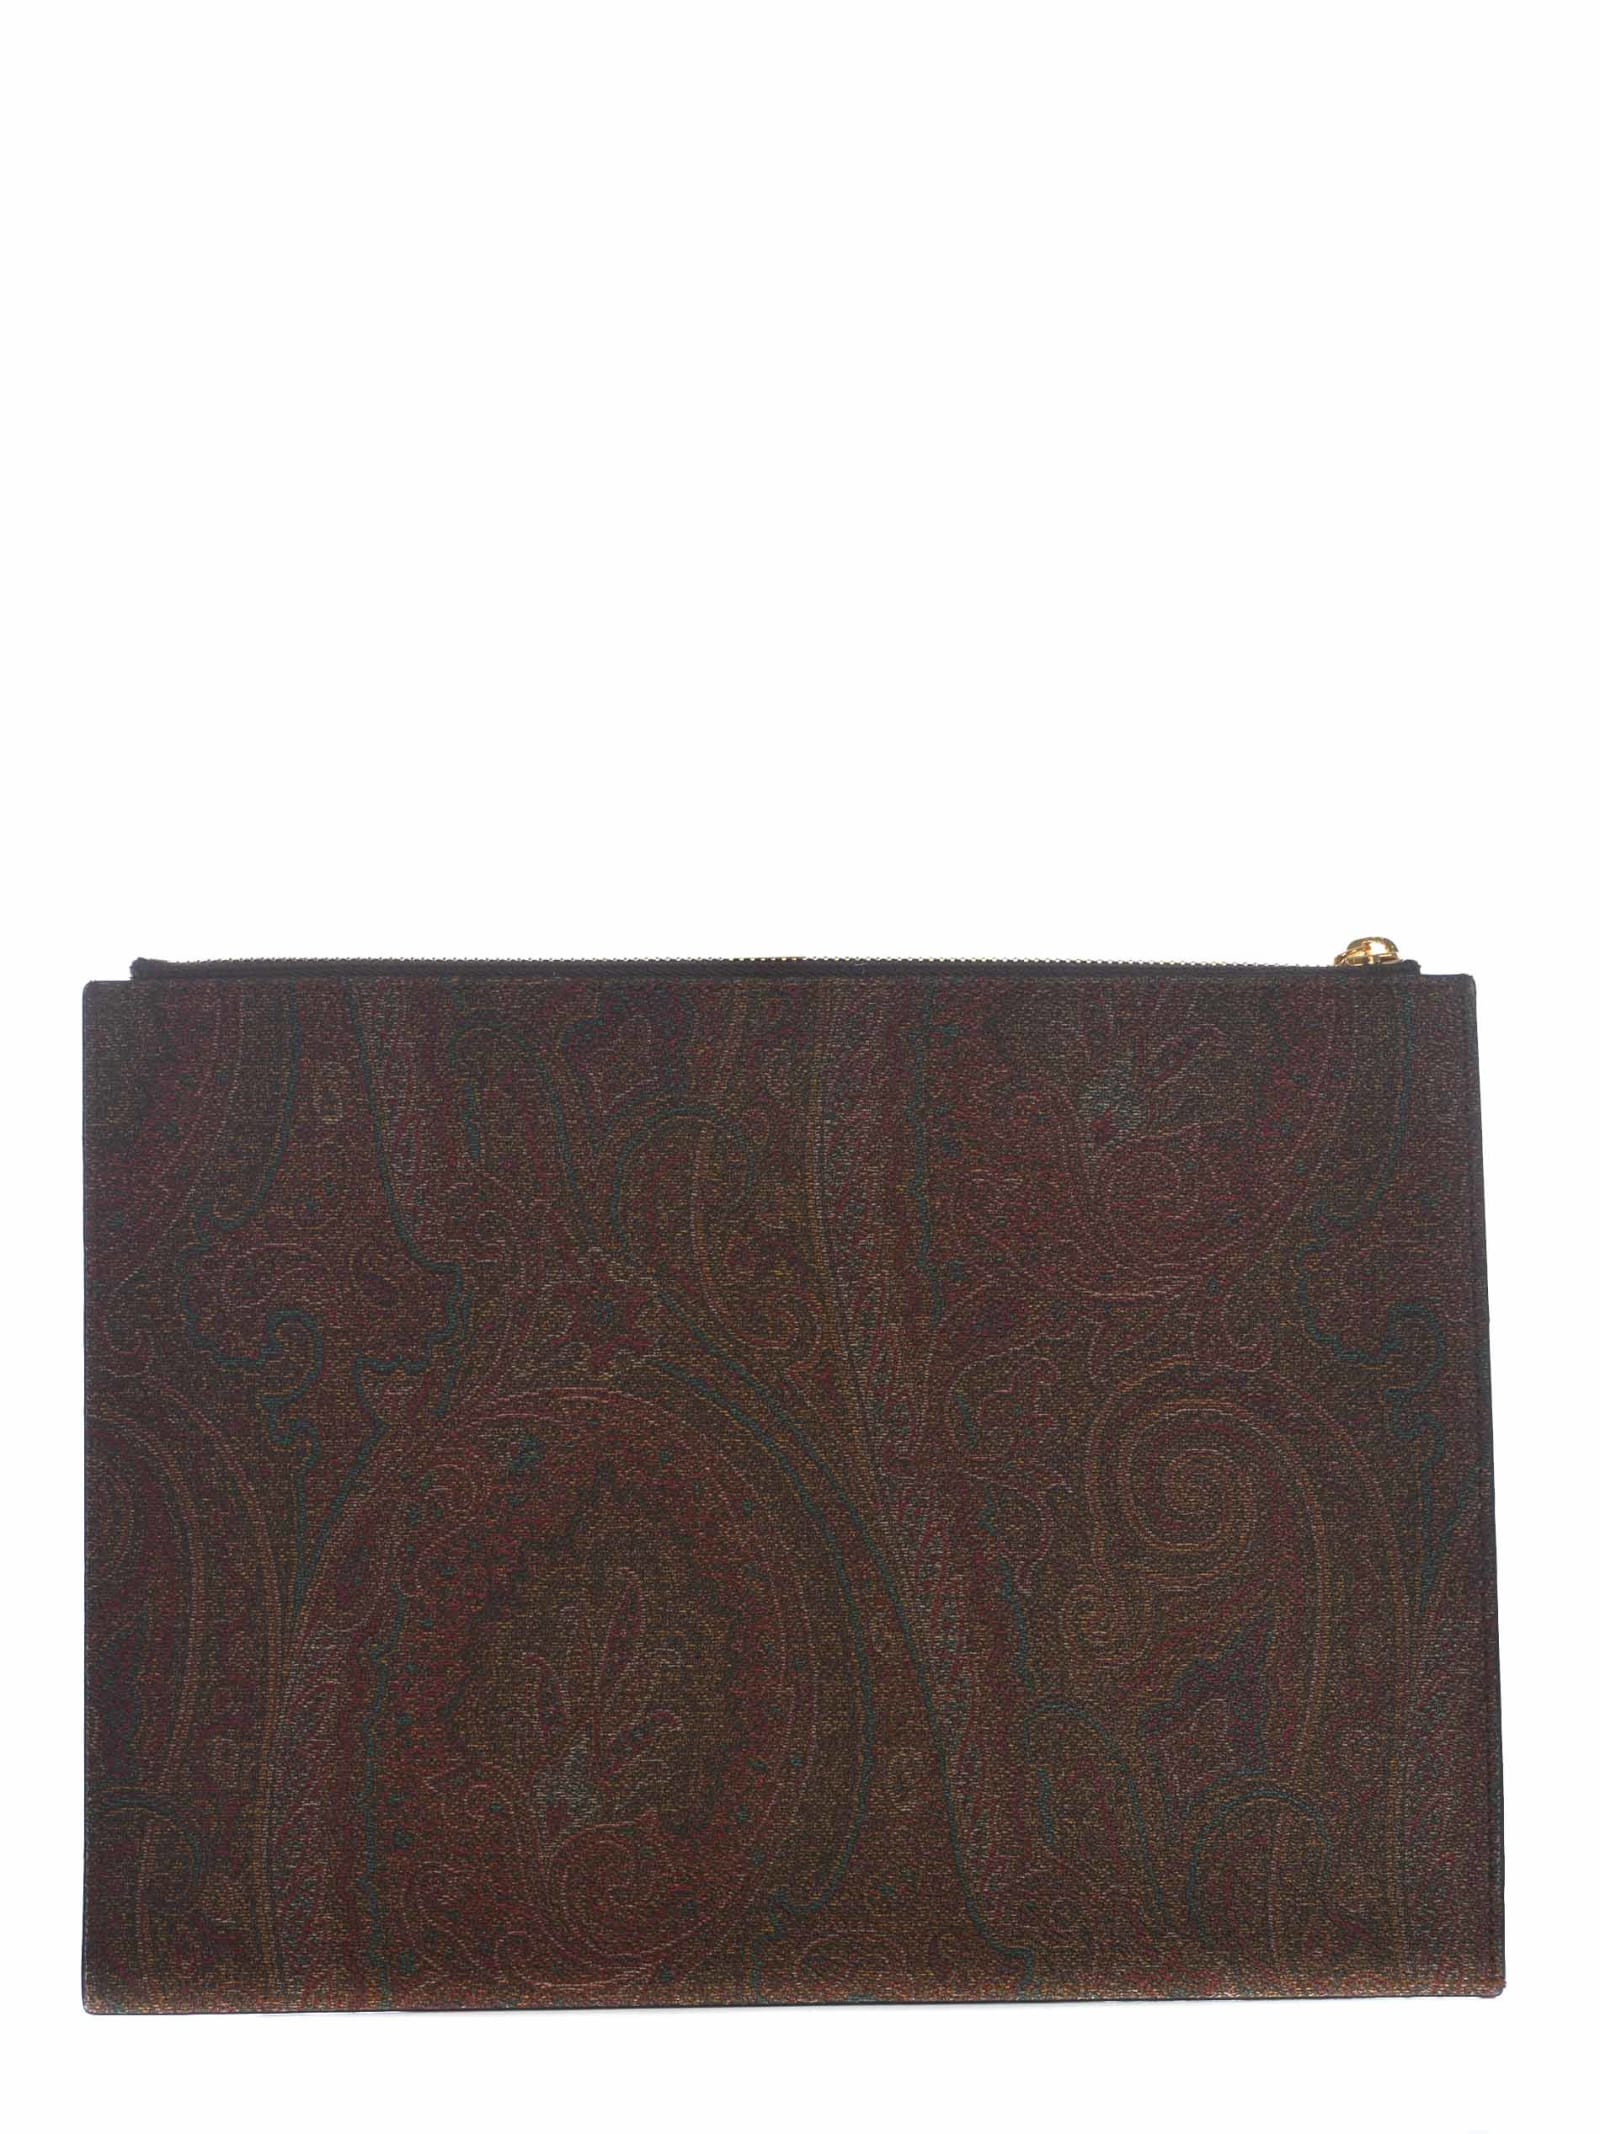 Shop Etro Flat Clutch Bag  Made Of Cotton Canvas In Paisley